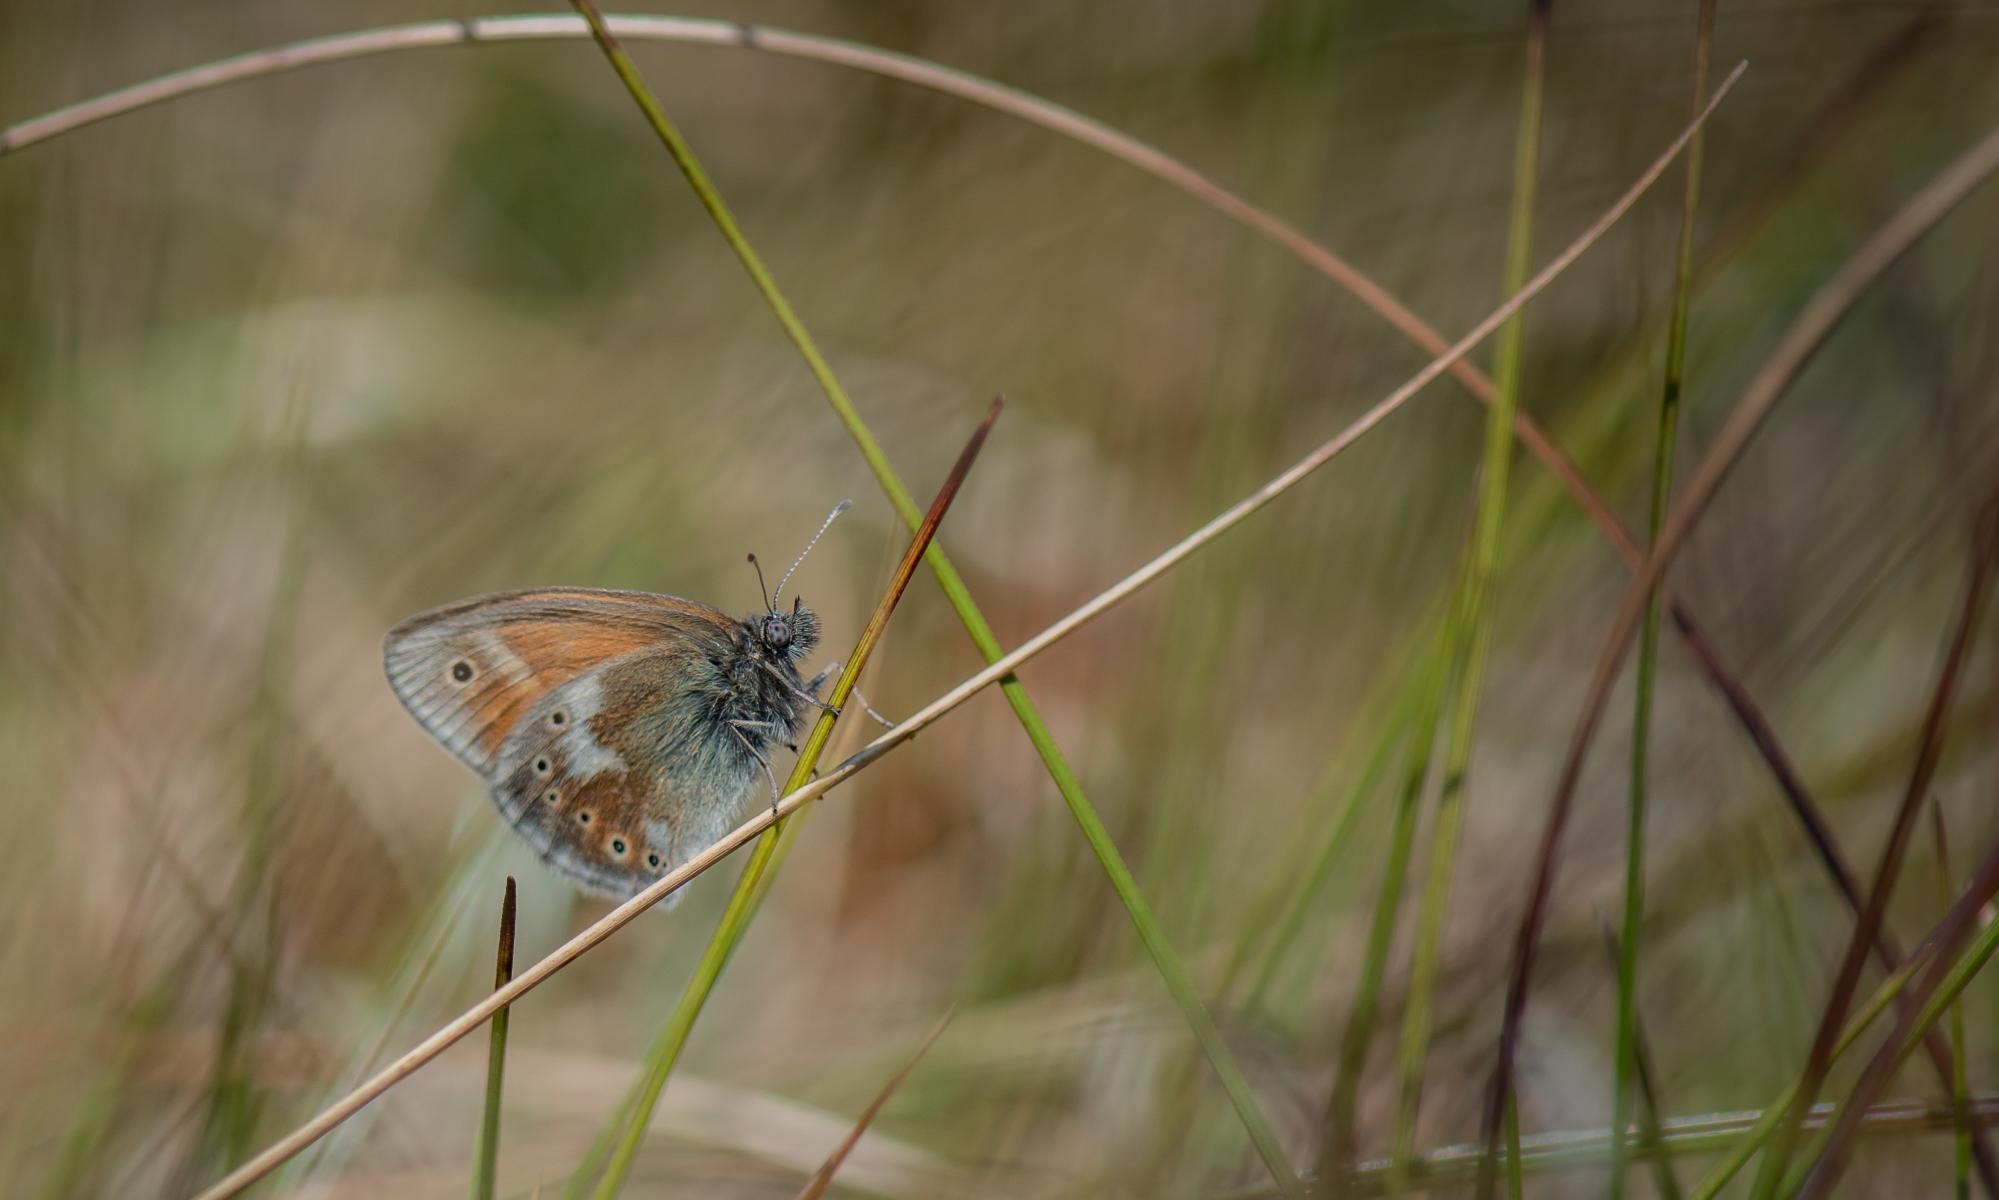 Large heath butterflies return to Manchester after 150 years